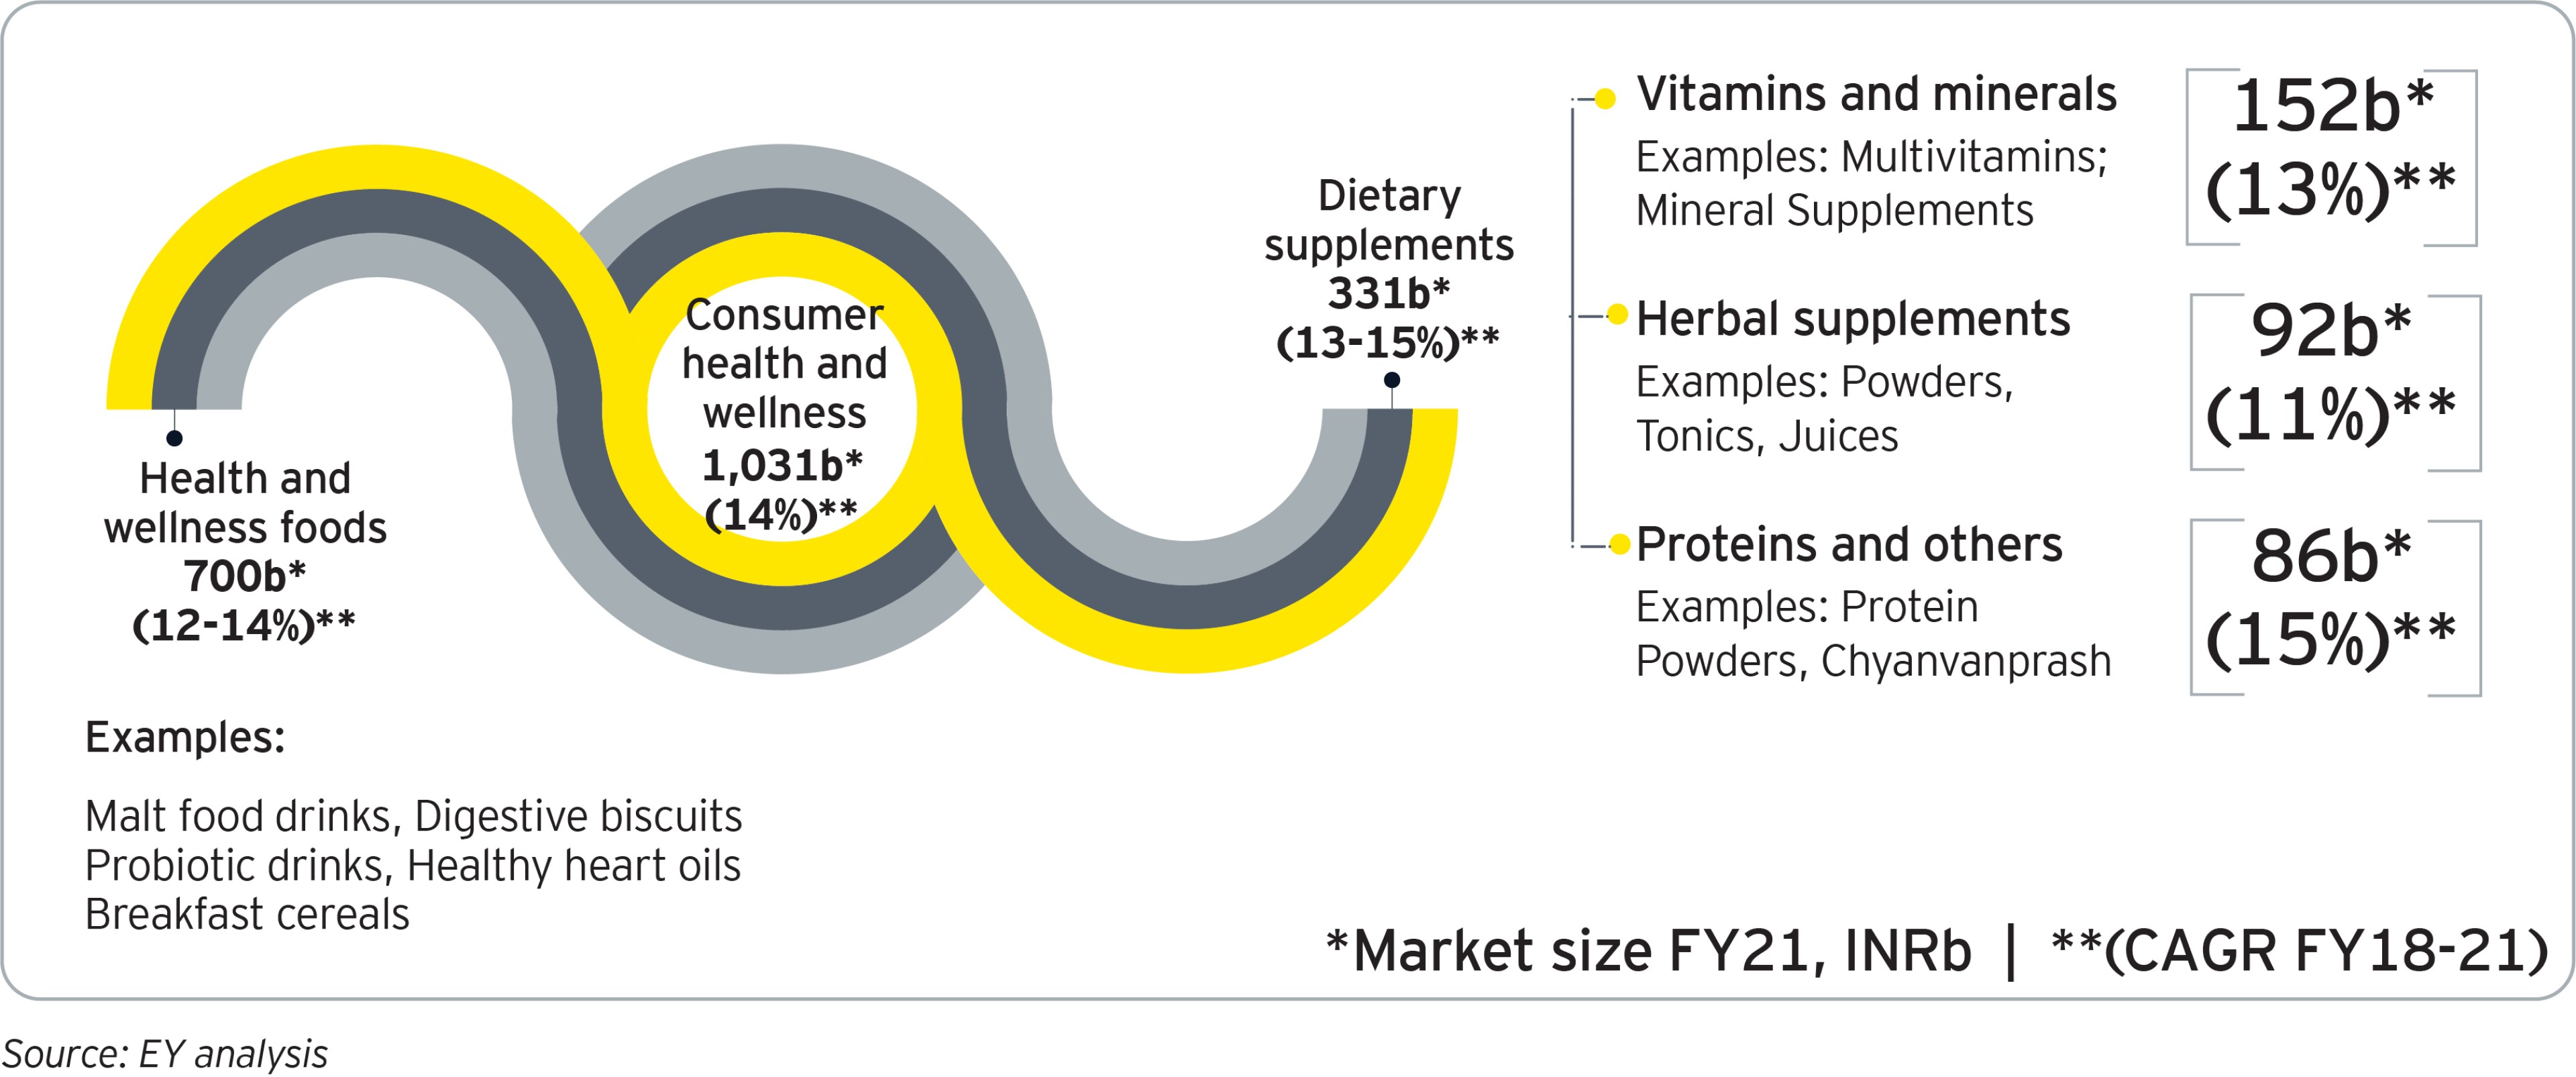 Dietary supplement is estimated to be an INR331b in FY21